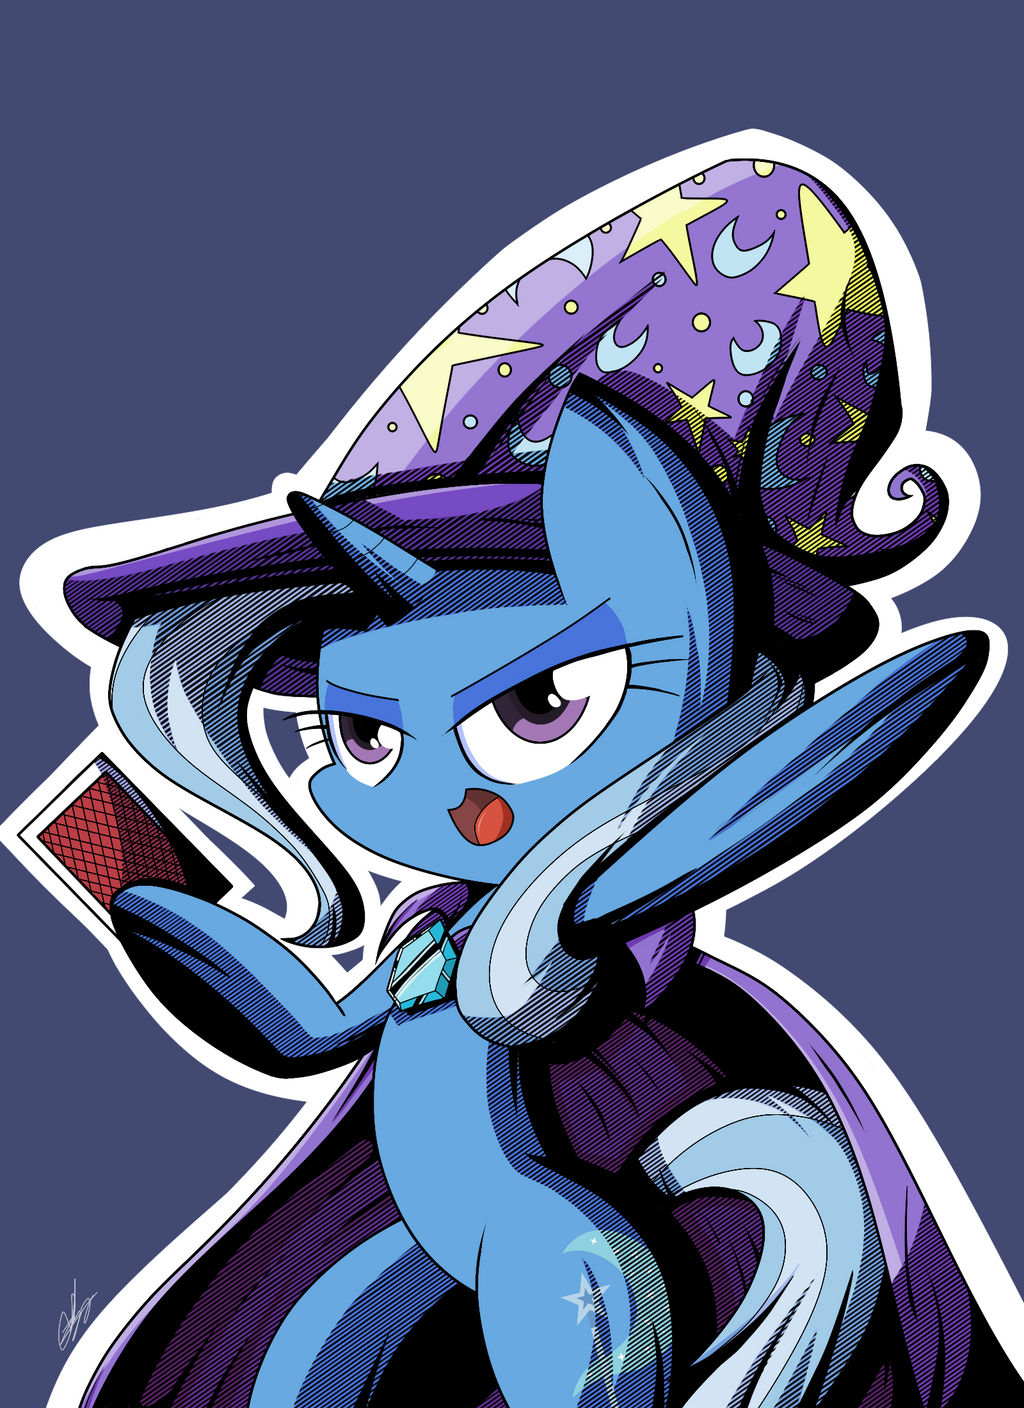 The Great And Powerful Trixie!!